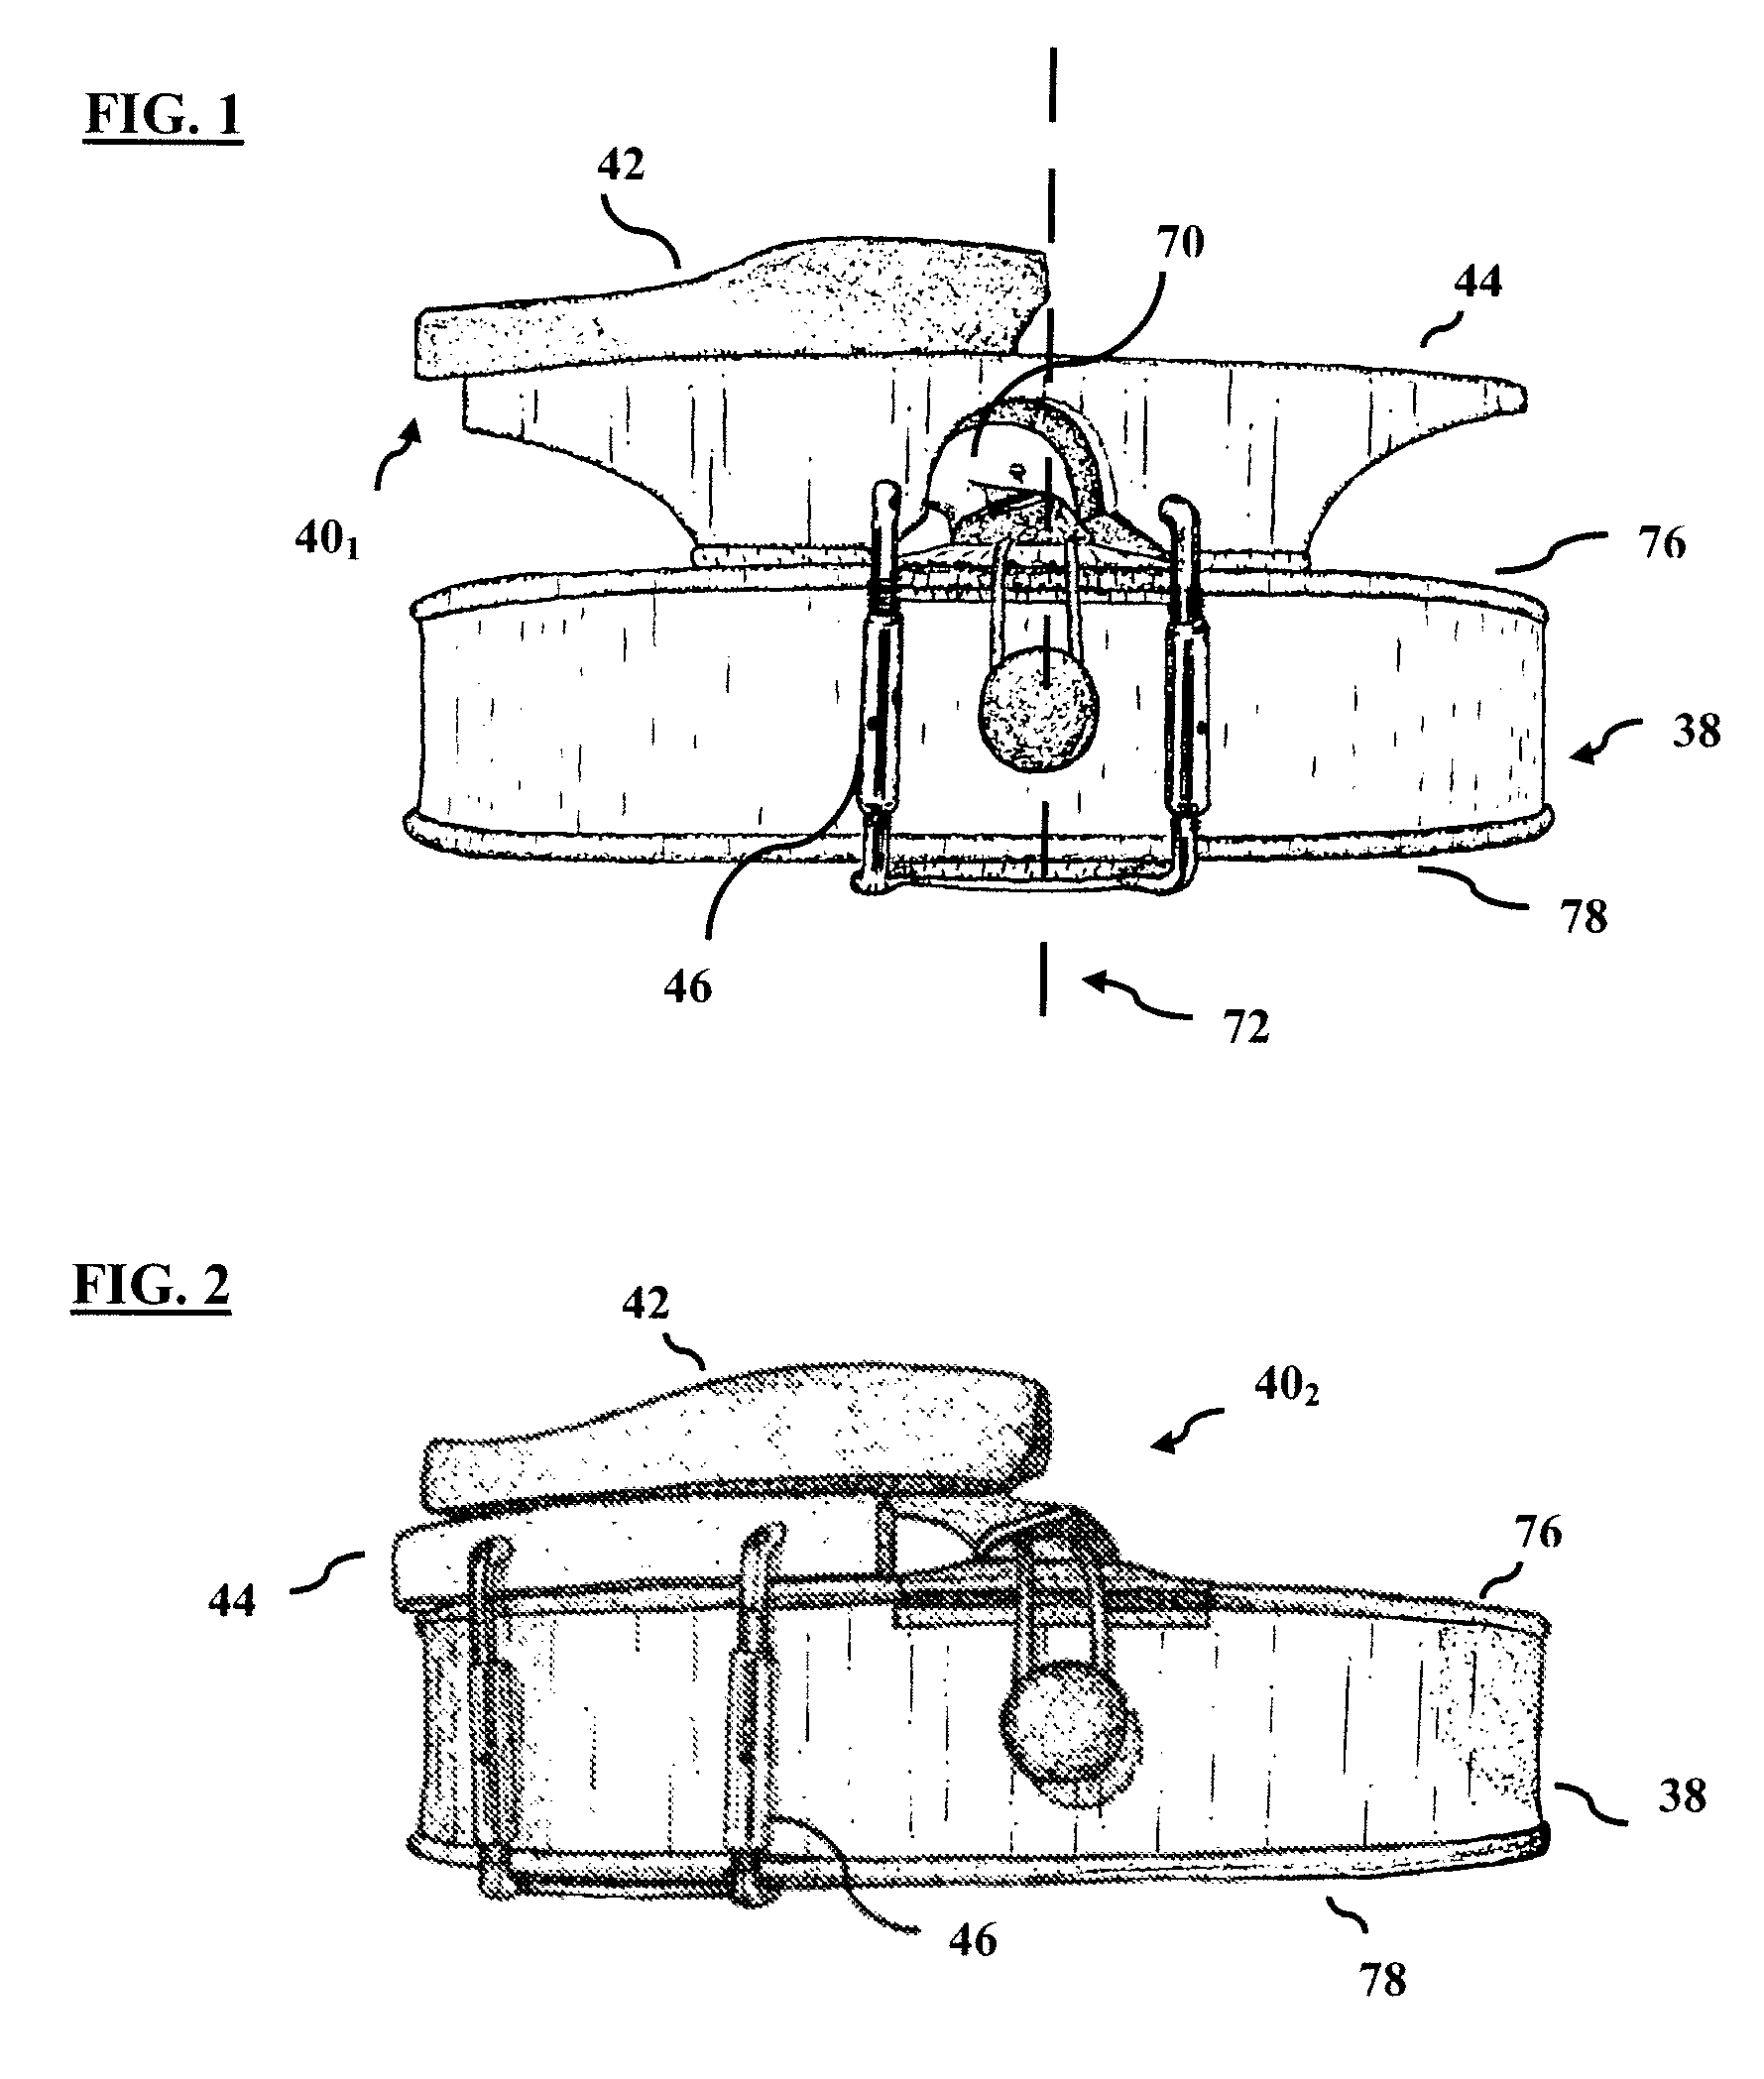 Chinrest device for musical instrument, method and kit